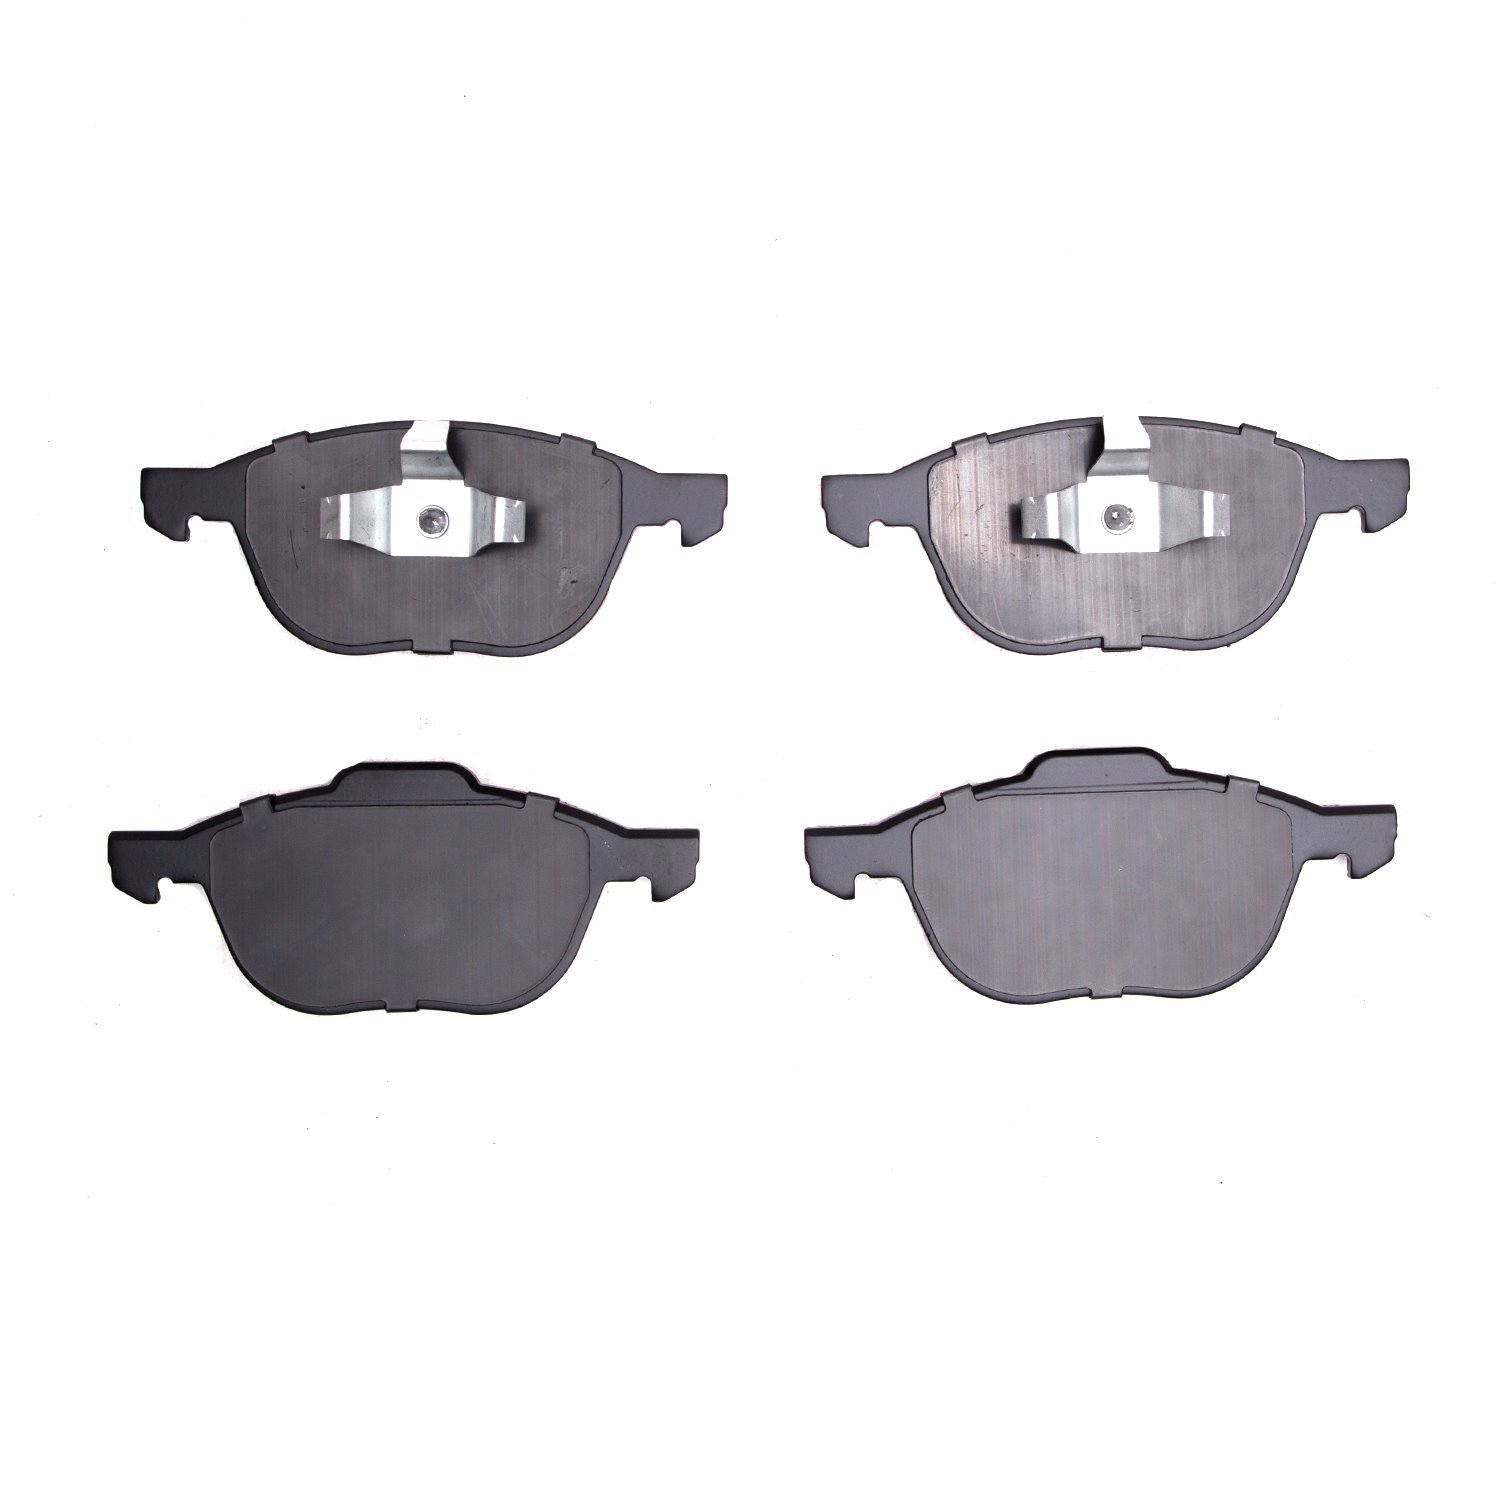 1310-1044-00 3000-Series Ceramic Brake Pads, Fits Select Multiple Makes/Models, Position: Front